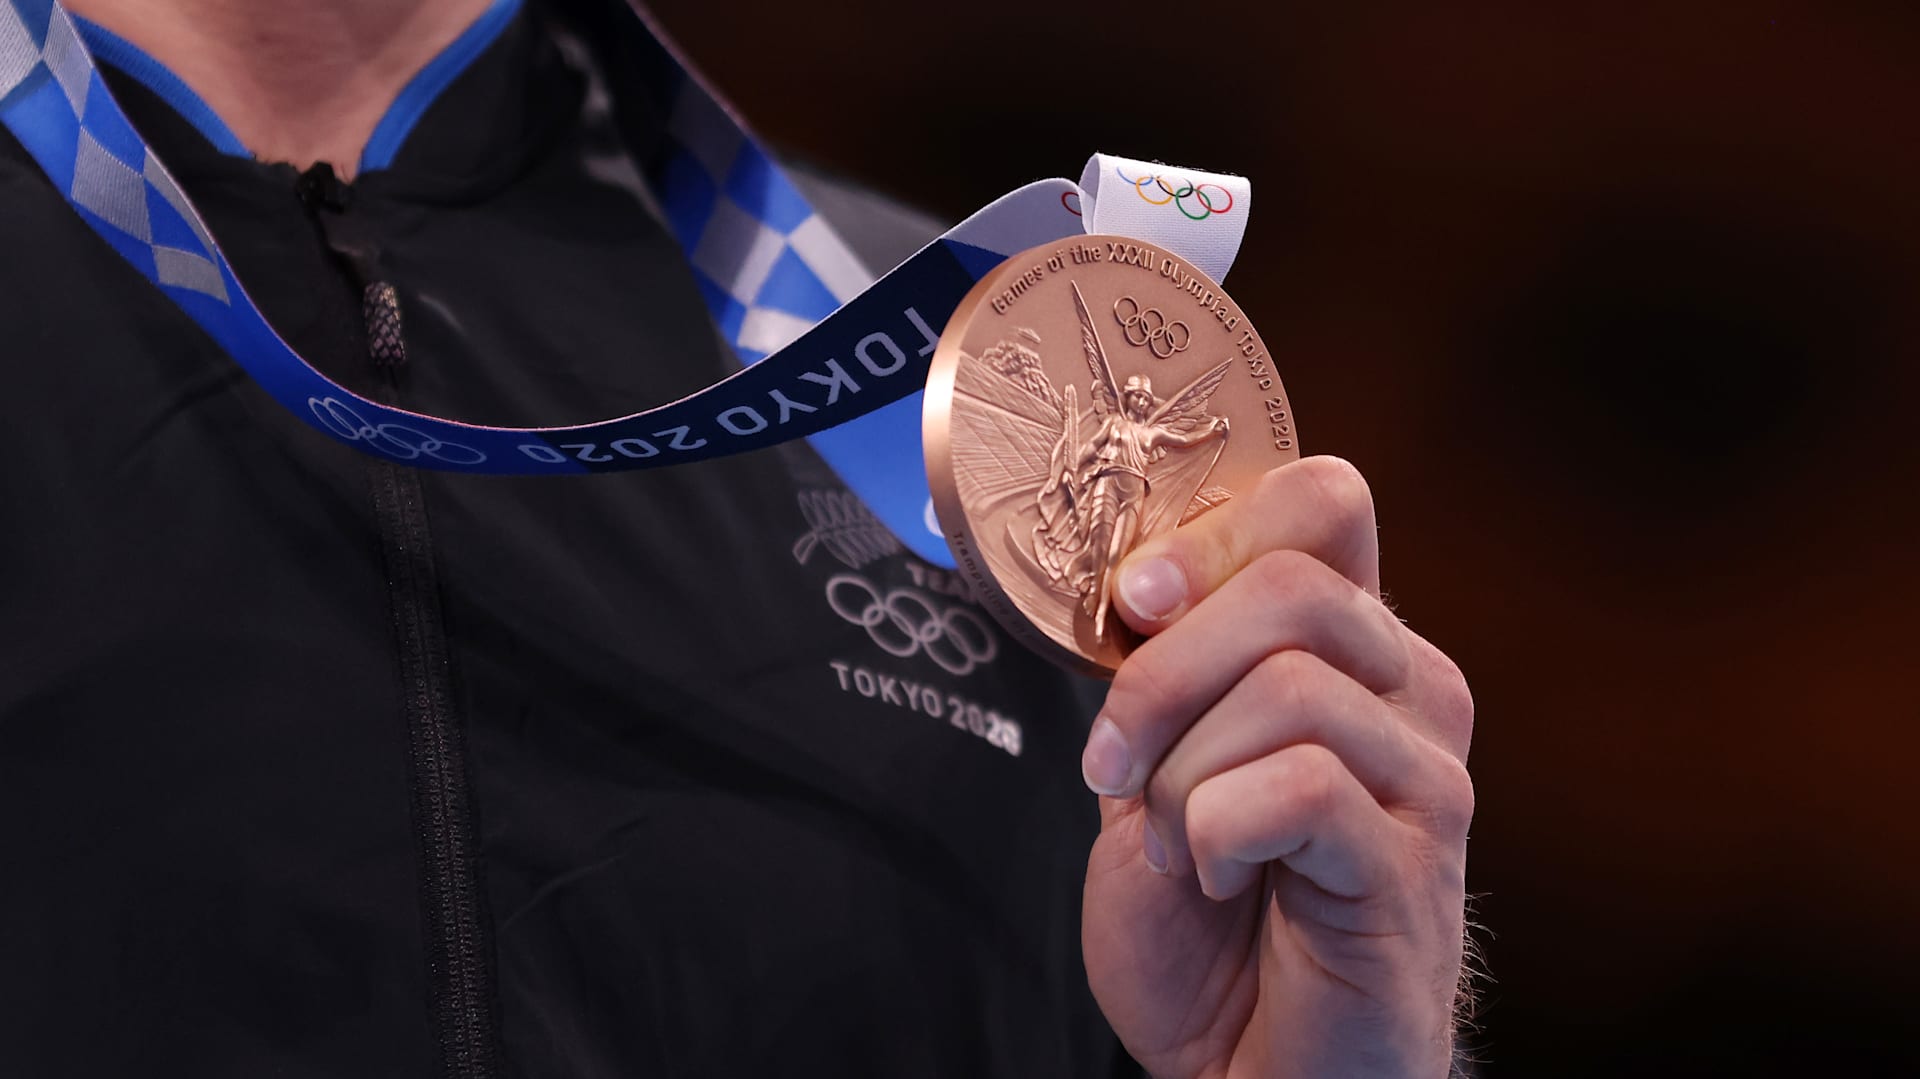 How bronze medal is decided in the Olympics